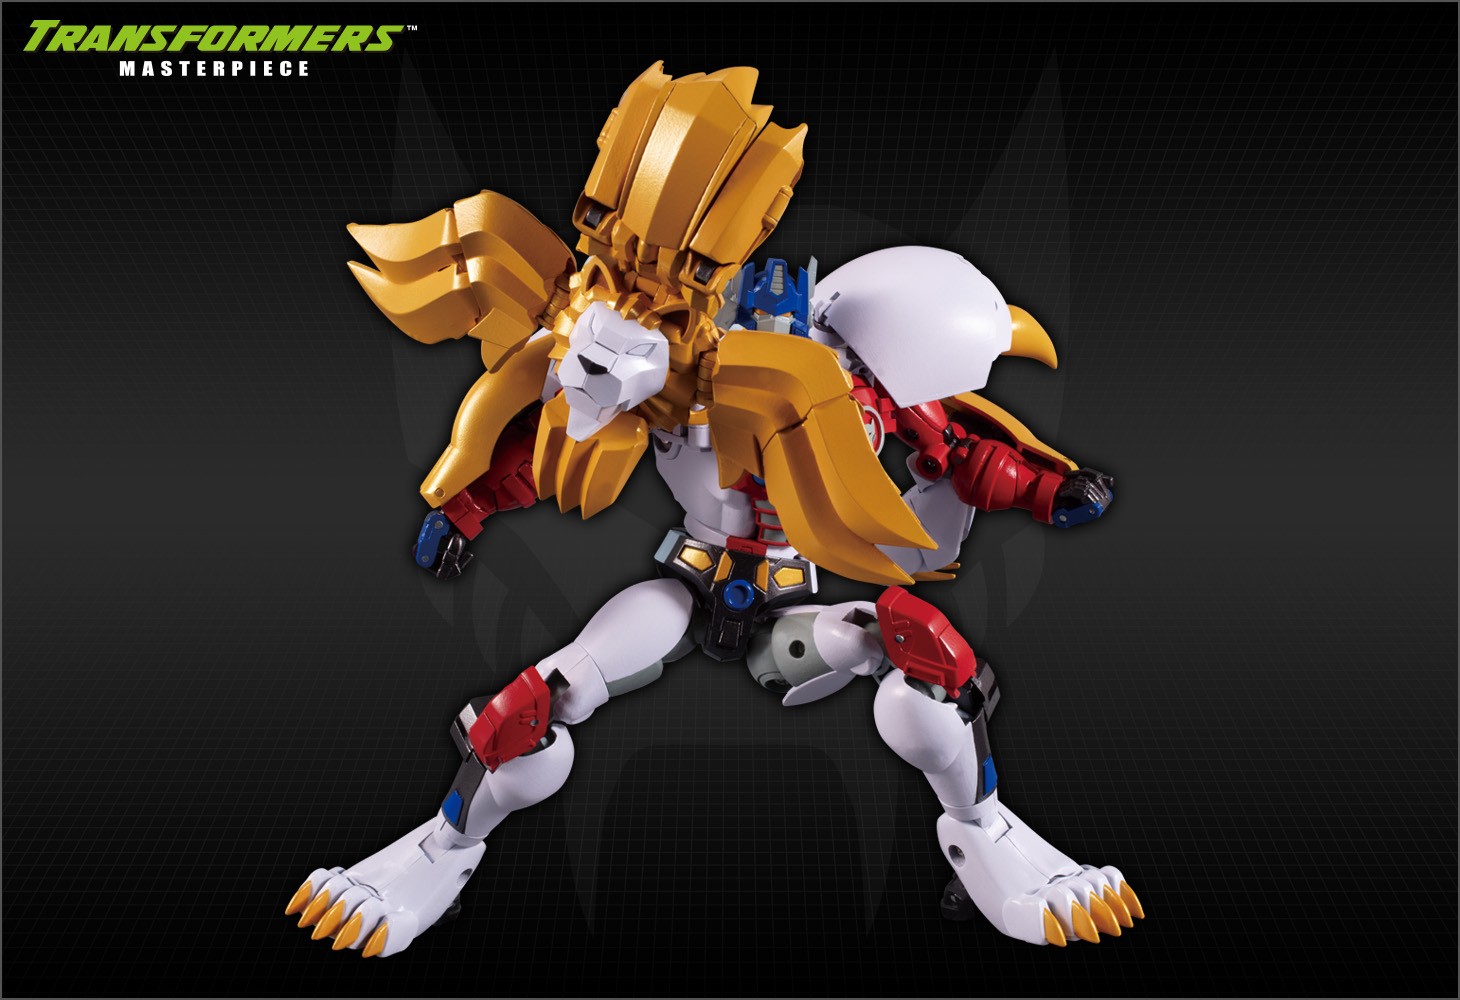 Transformers News: Transformers MP 48 Lio Convoy Official Takara Images and Promotional Video